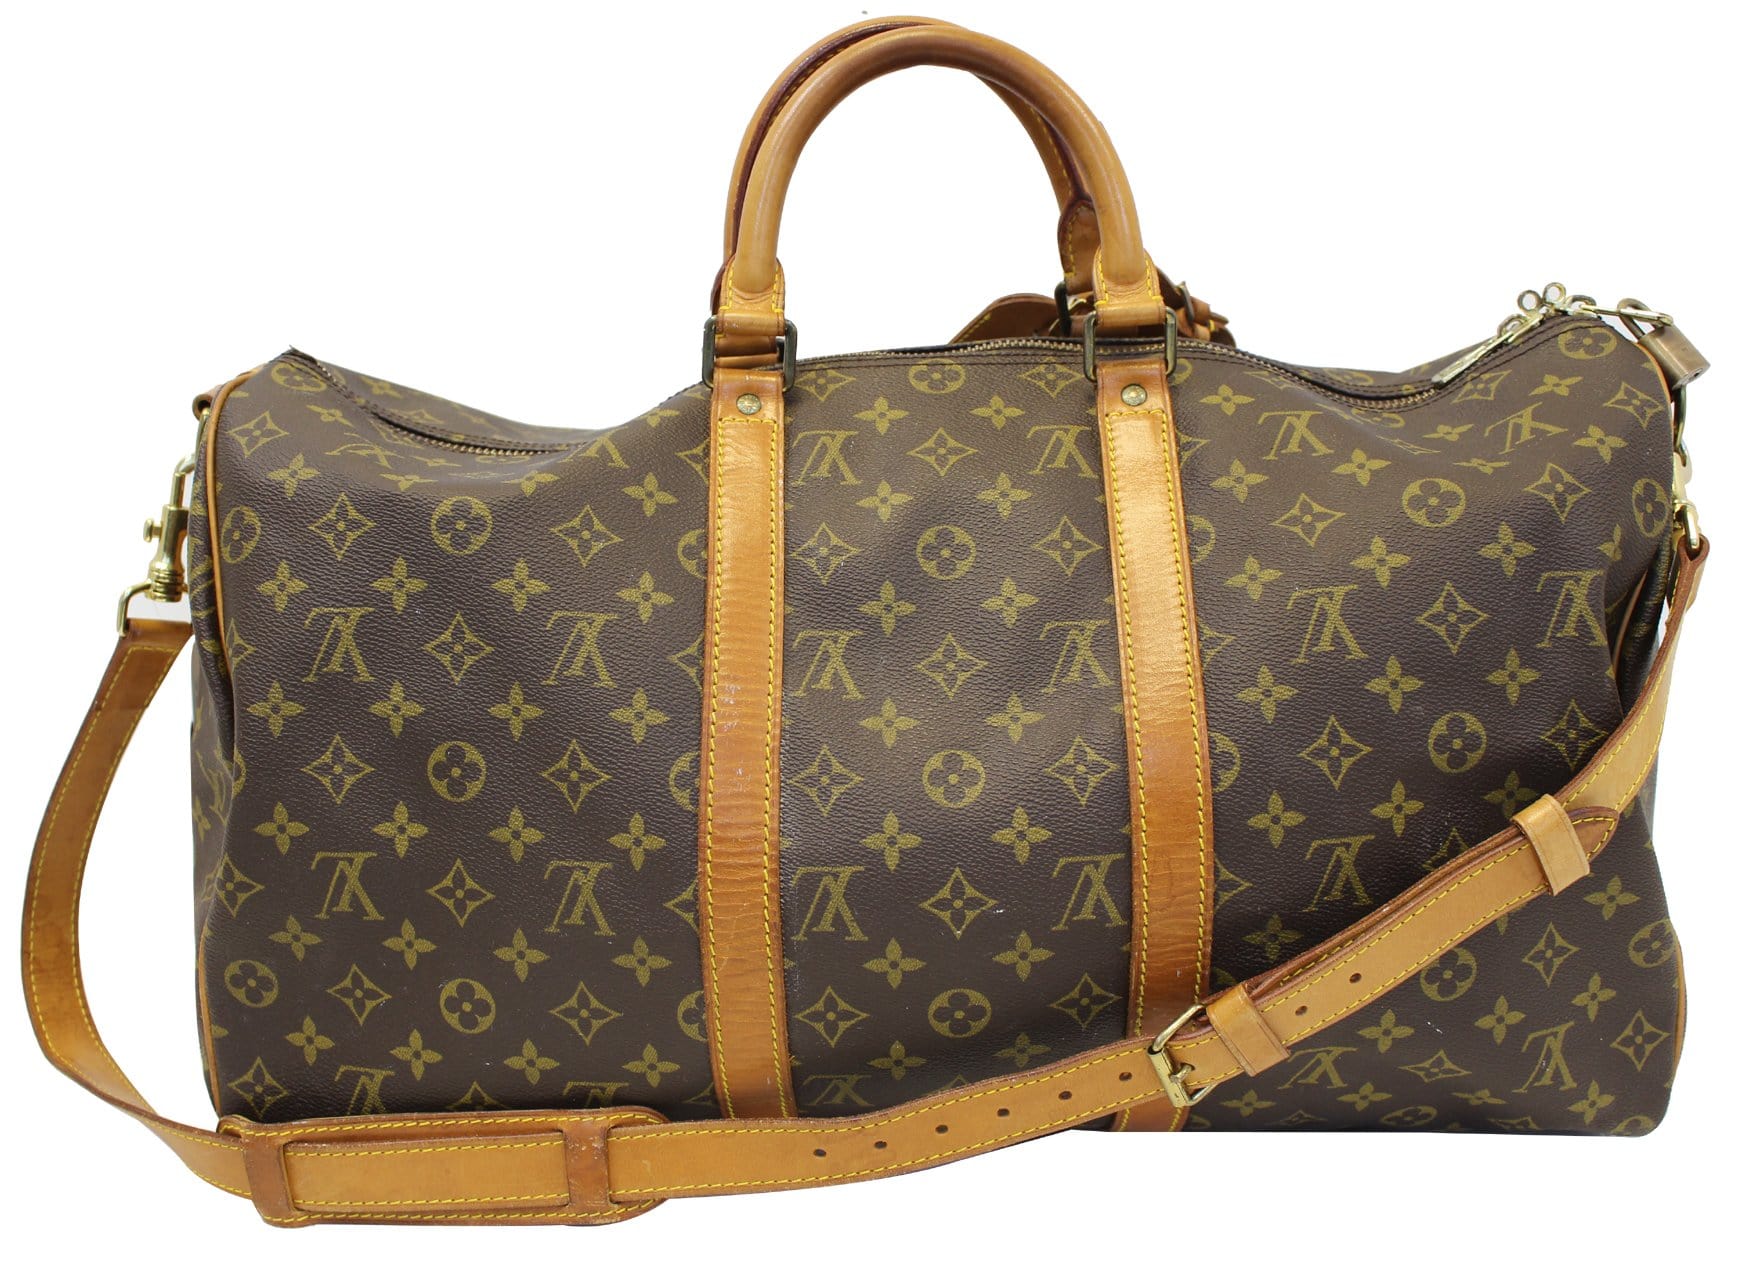 100% Authentic! LOUIS-VUITTON Keepall 50 bandouliere DUFFEL TRAVEL